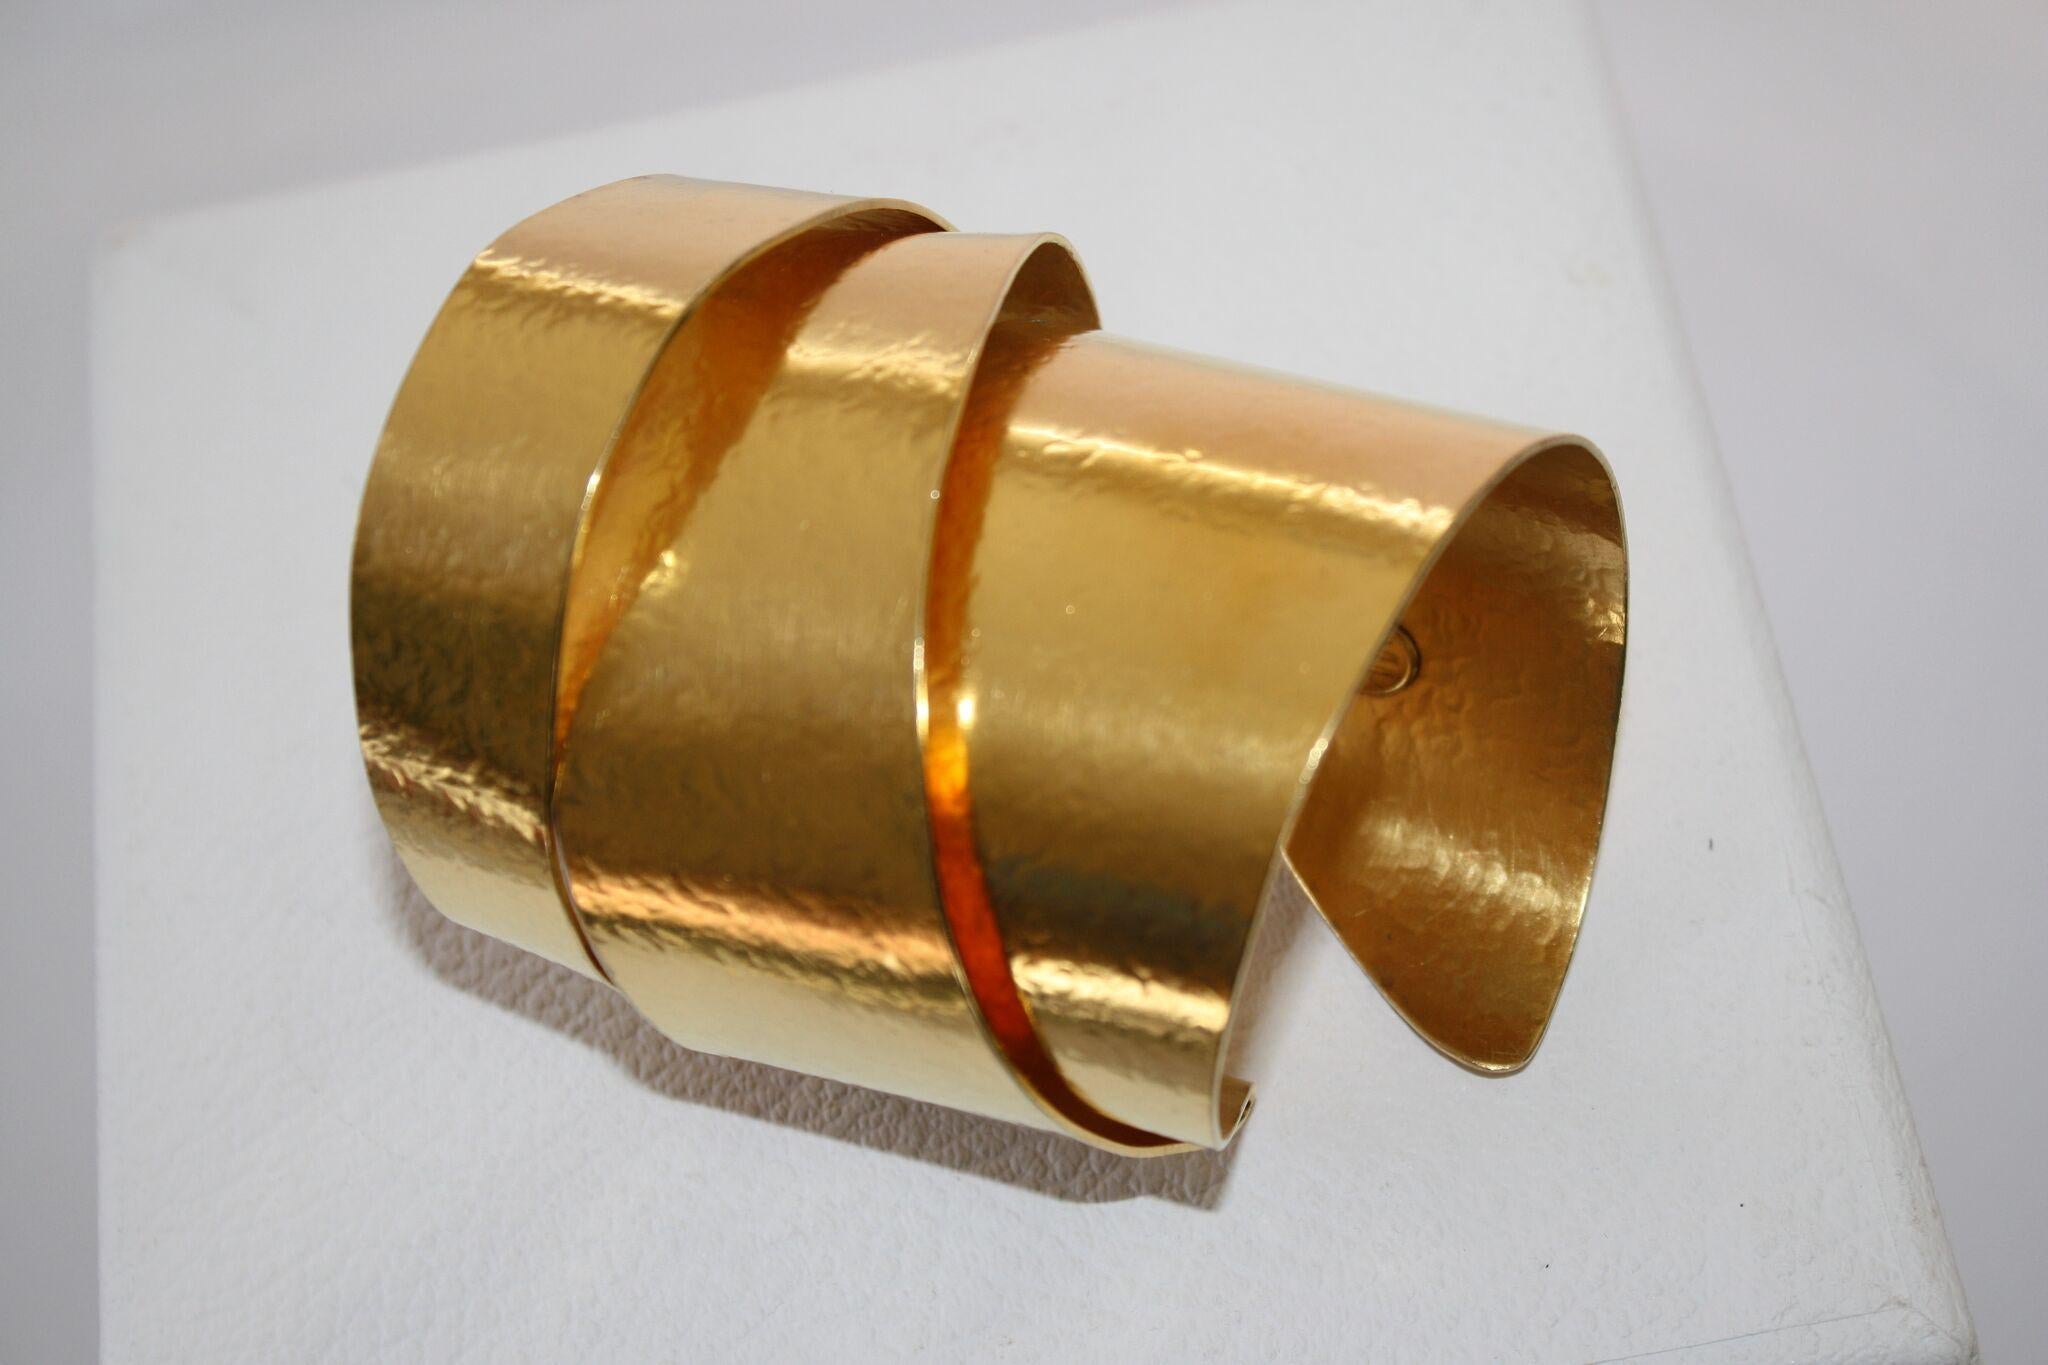 Gilded brass flexible cuff bracelet from Herve van der Straeten. This designer is no longer producing jewelry, making all remaining pieces collector's items. 
3” long
diameter 2 1/4 